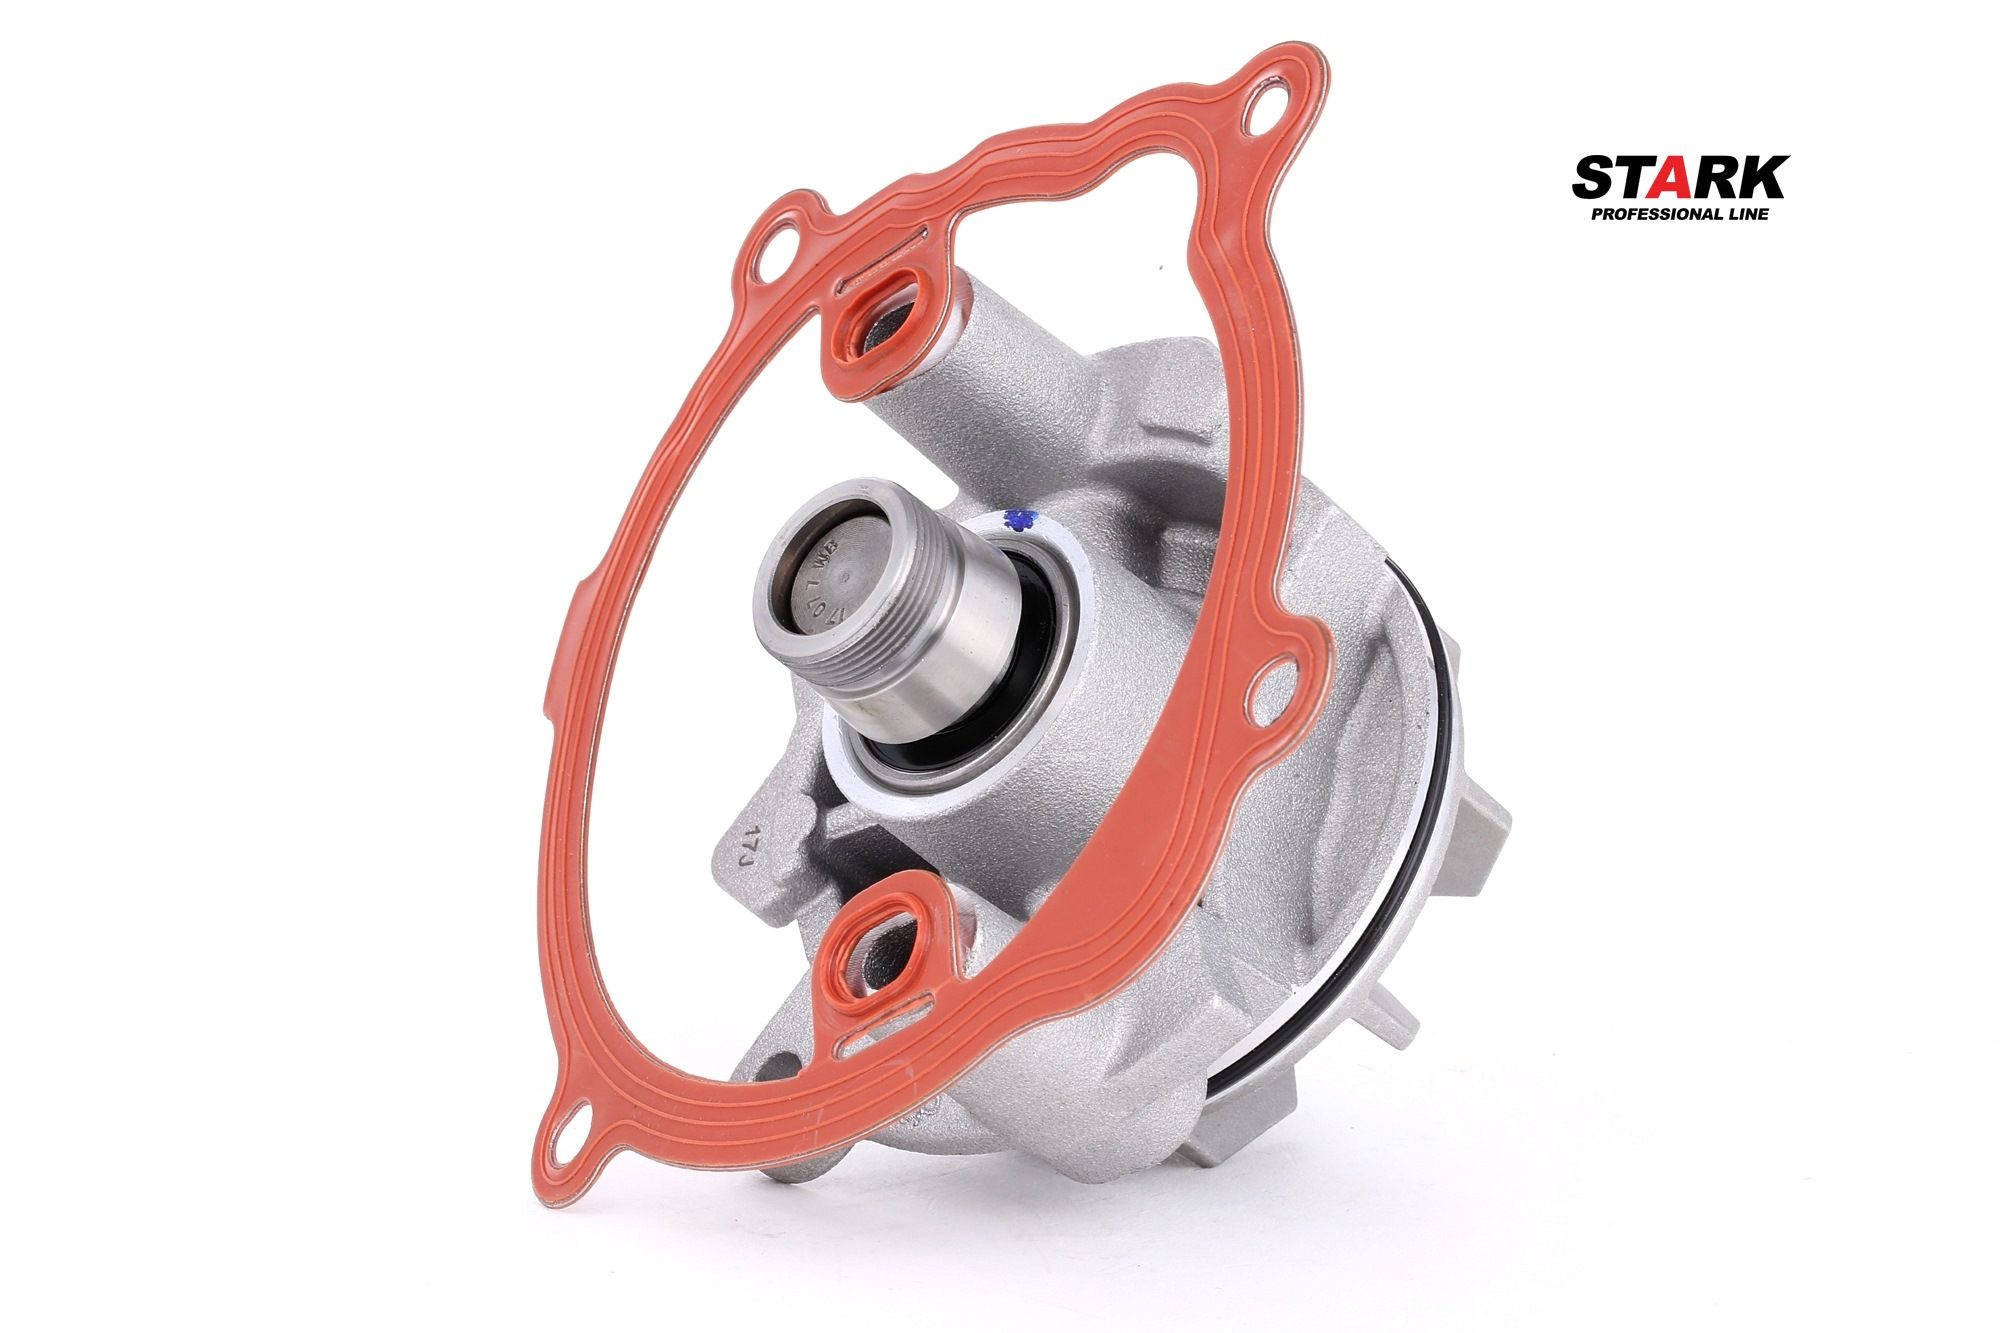 STARK SKWP-0520026 Water pump without belt pulley, with gaskets/seals, without lid, Mechanical, Metal impeller